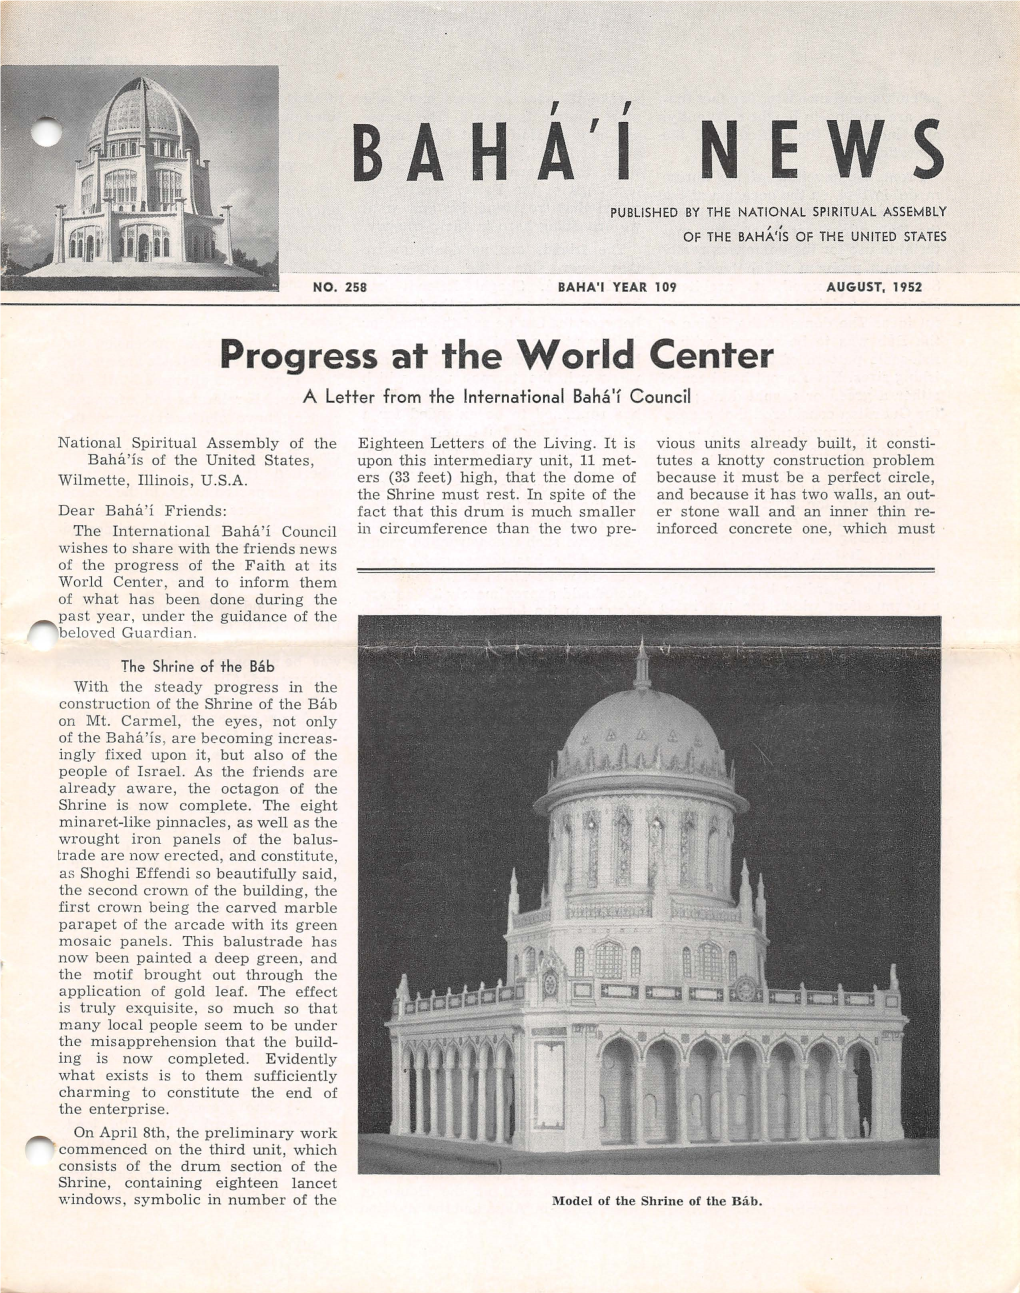 BAHA'i NEWS PUBLISHED by the NATIONAL SPIRITUAL ASSEMBLY of the BAHA'is of the UNITED STATES